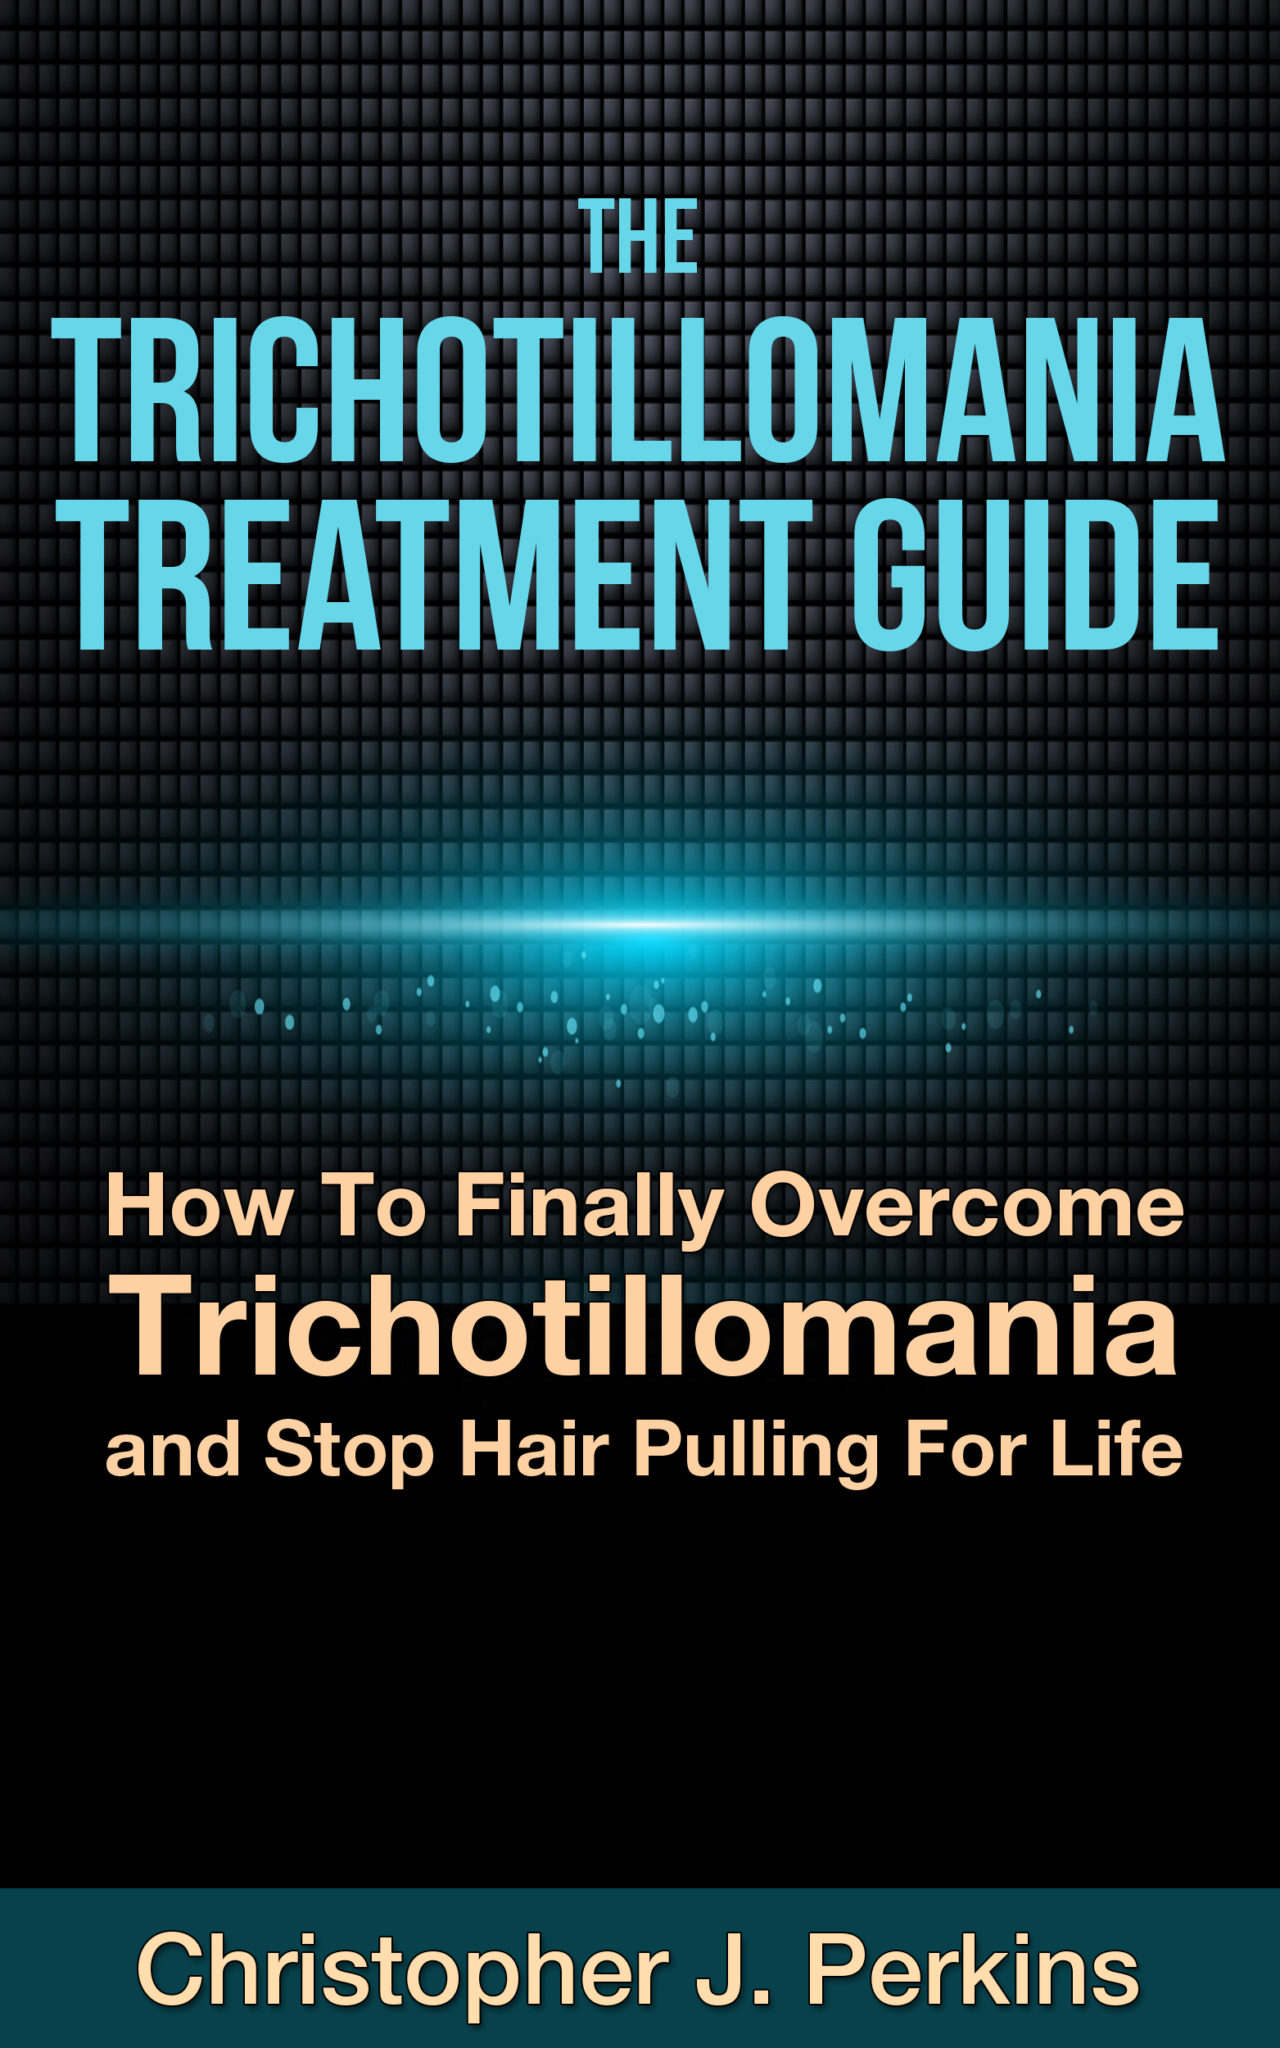 The Trichotillomania Treatment Guide – How To Finally Overcome Trichotillomania and Stop Hair Pulling For Life by Christopher J. Perkins